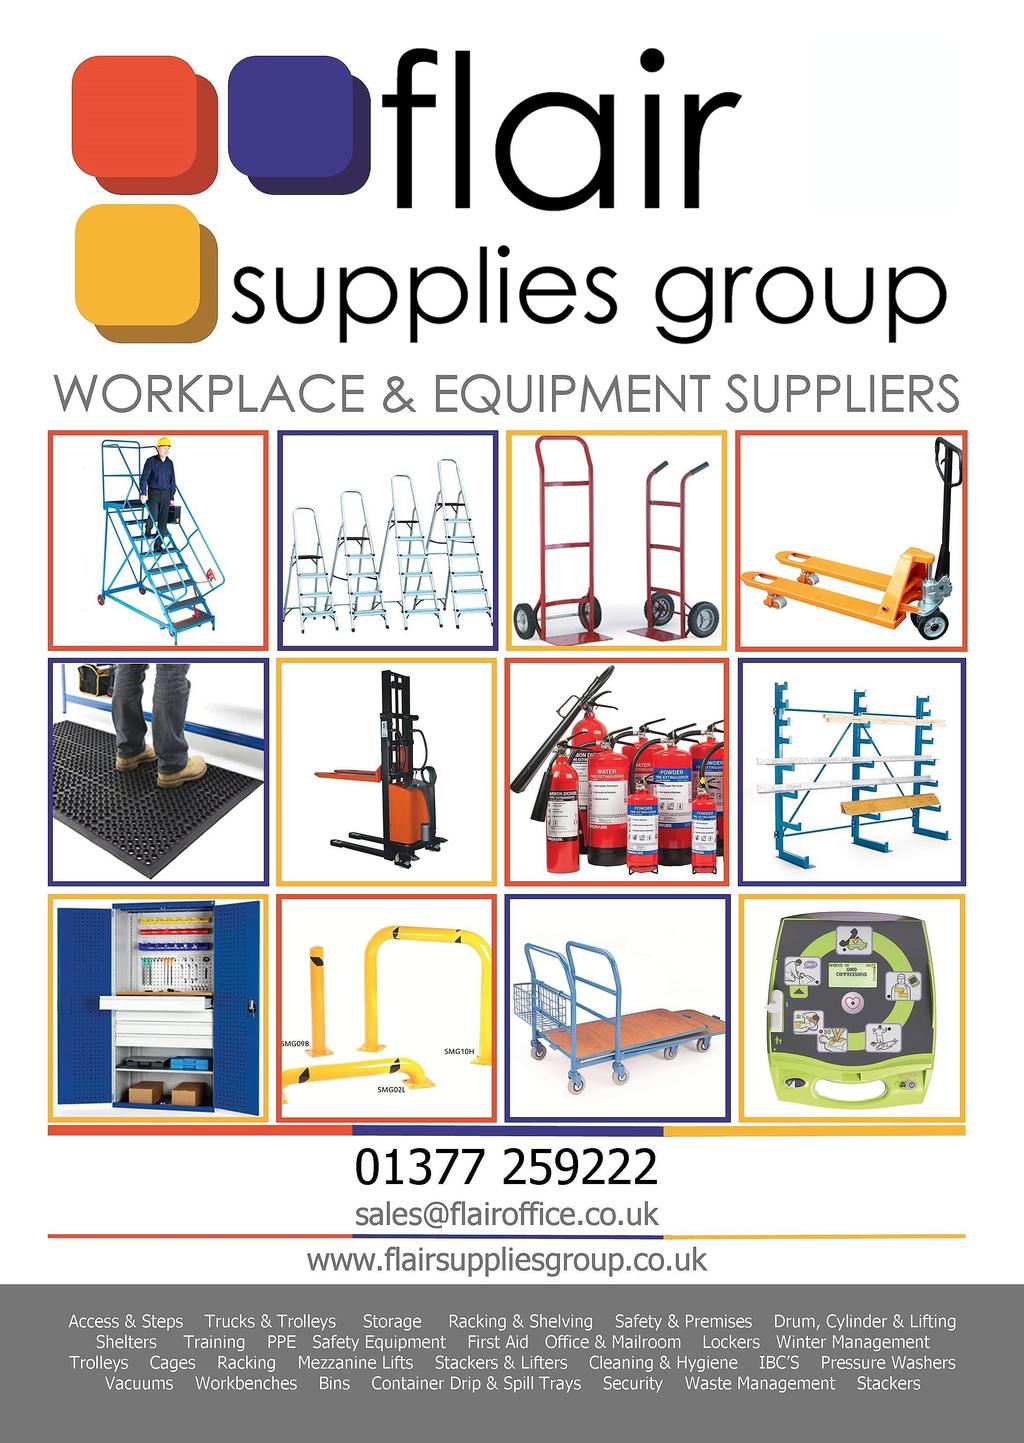 COMING VERY SOON PRE-ORDER FROM YOUR ACCOUNT MANAGER A COPY OUR NEW WORKPLACE & EQUIPTMENT SUPPLIES CATALOGUE Flair Supplies Group, 78